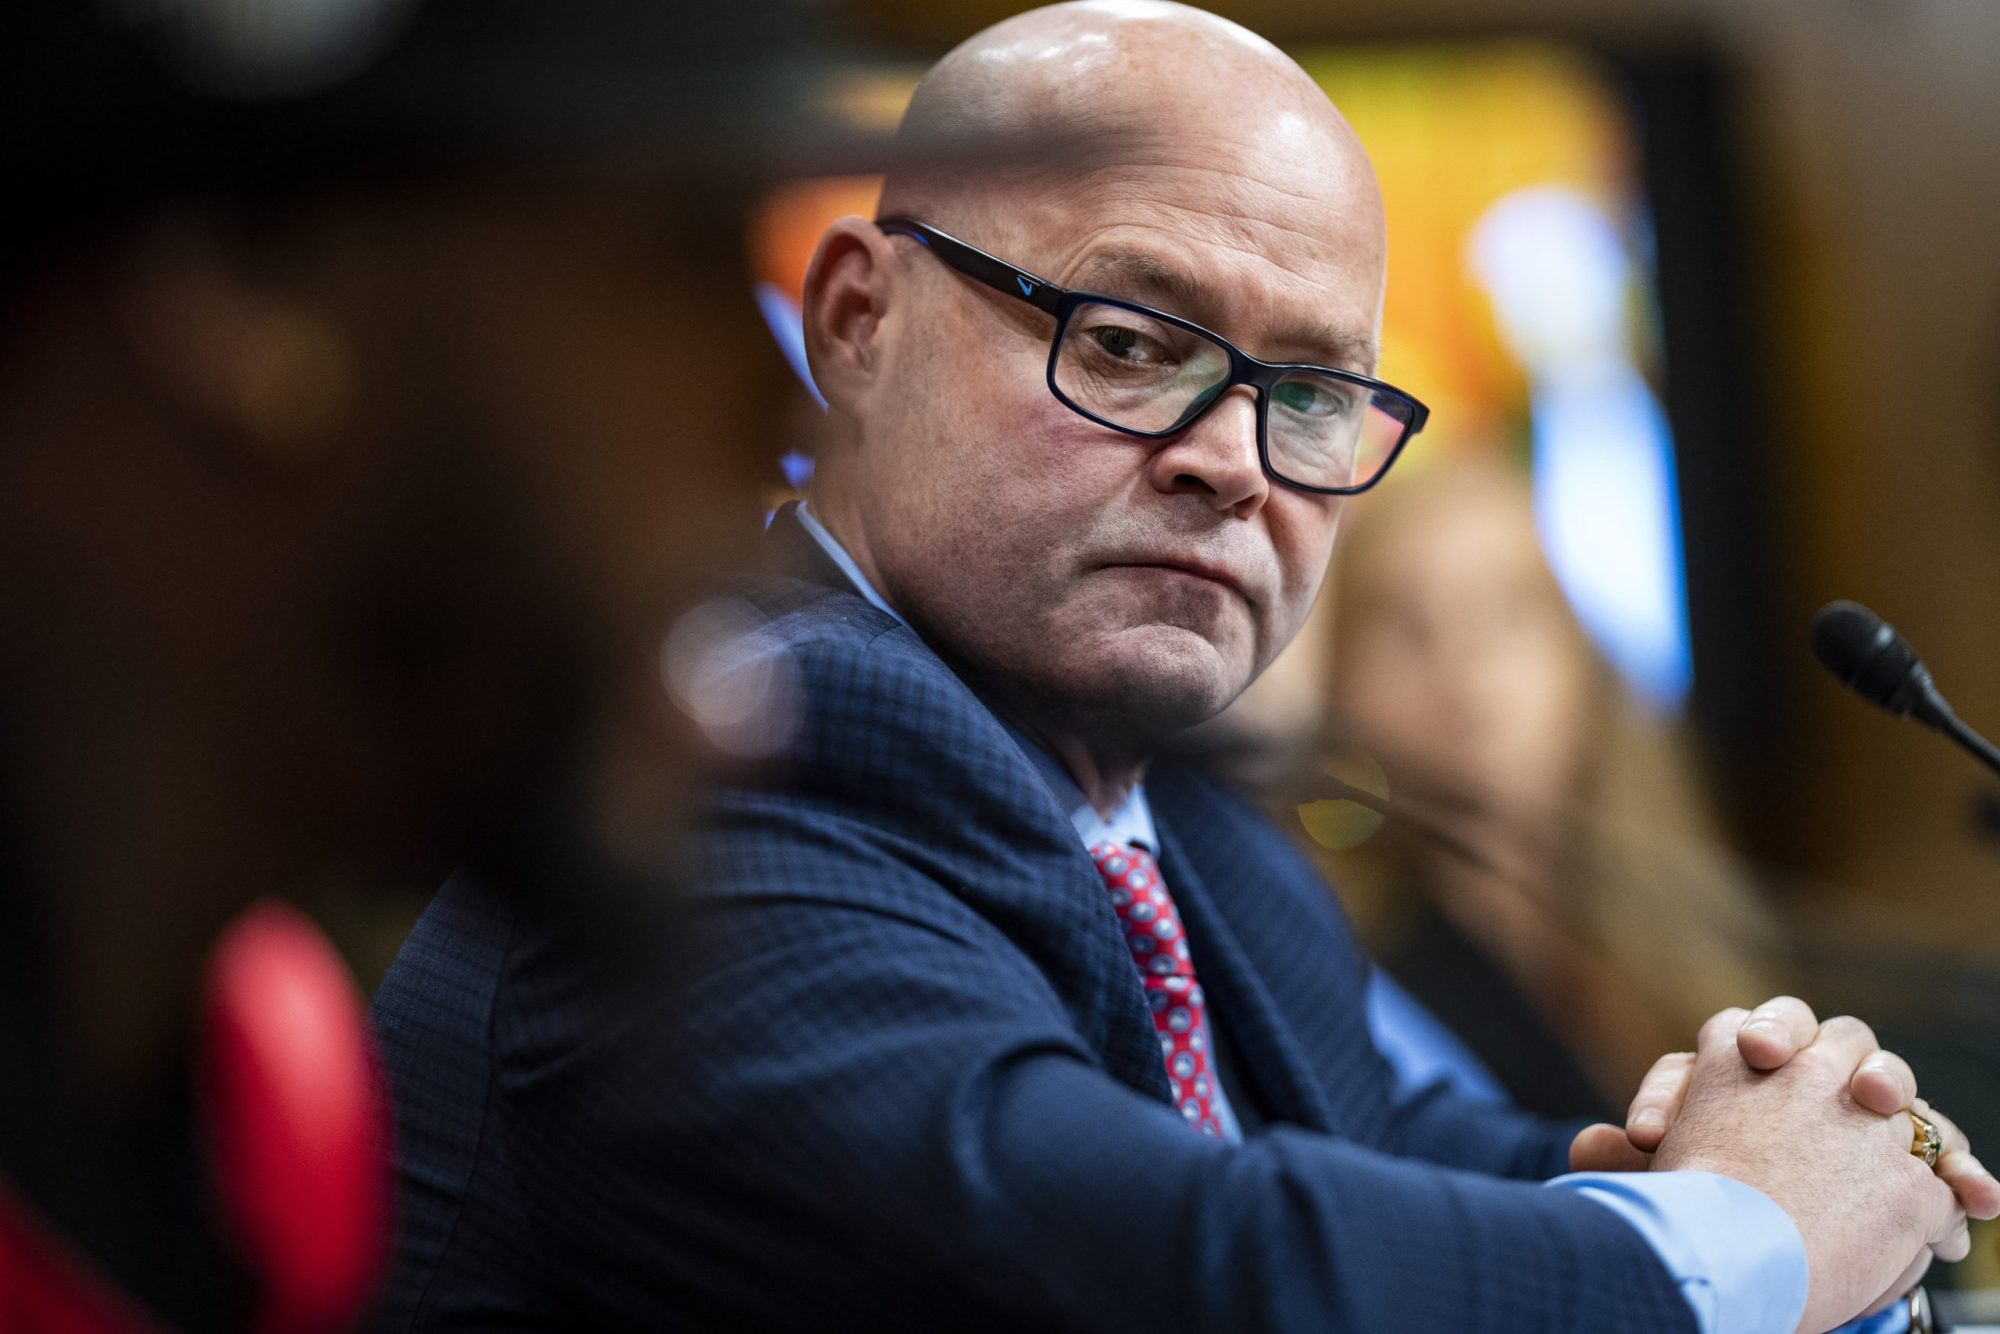 In the foreground, Amazon Labor Union president Christian Smalls can be seen out of the camera's focus. Behind him, in focus, is Sean O'Brien. Sean is middle-aged, bald, bespectacled, and white. He has a blue suit on a maroon tie.